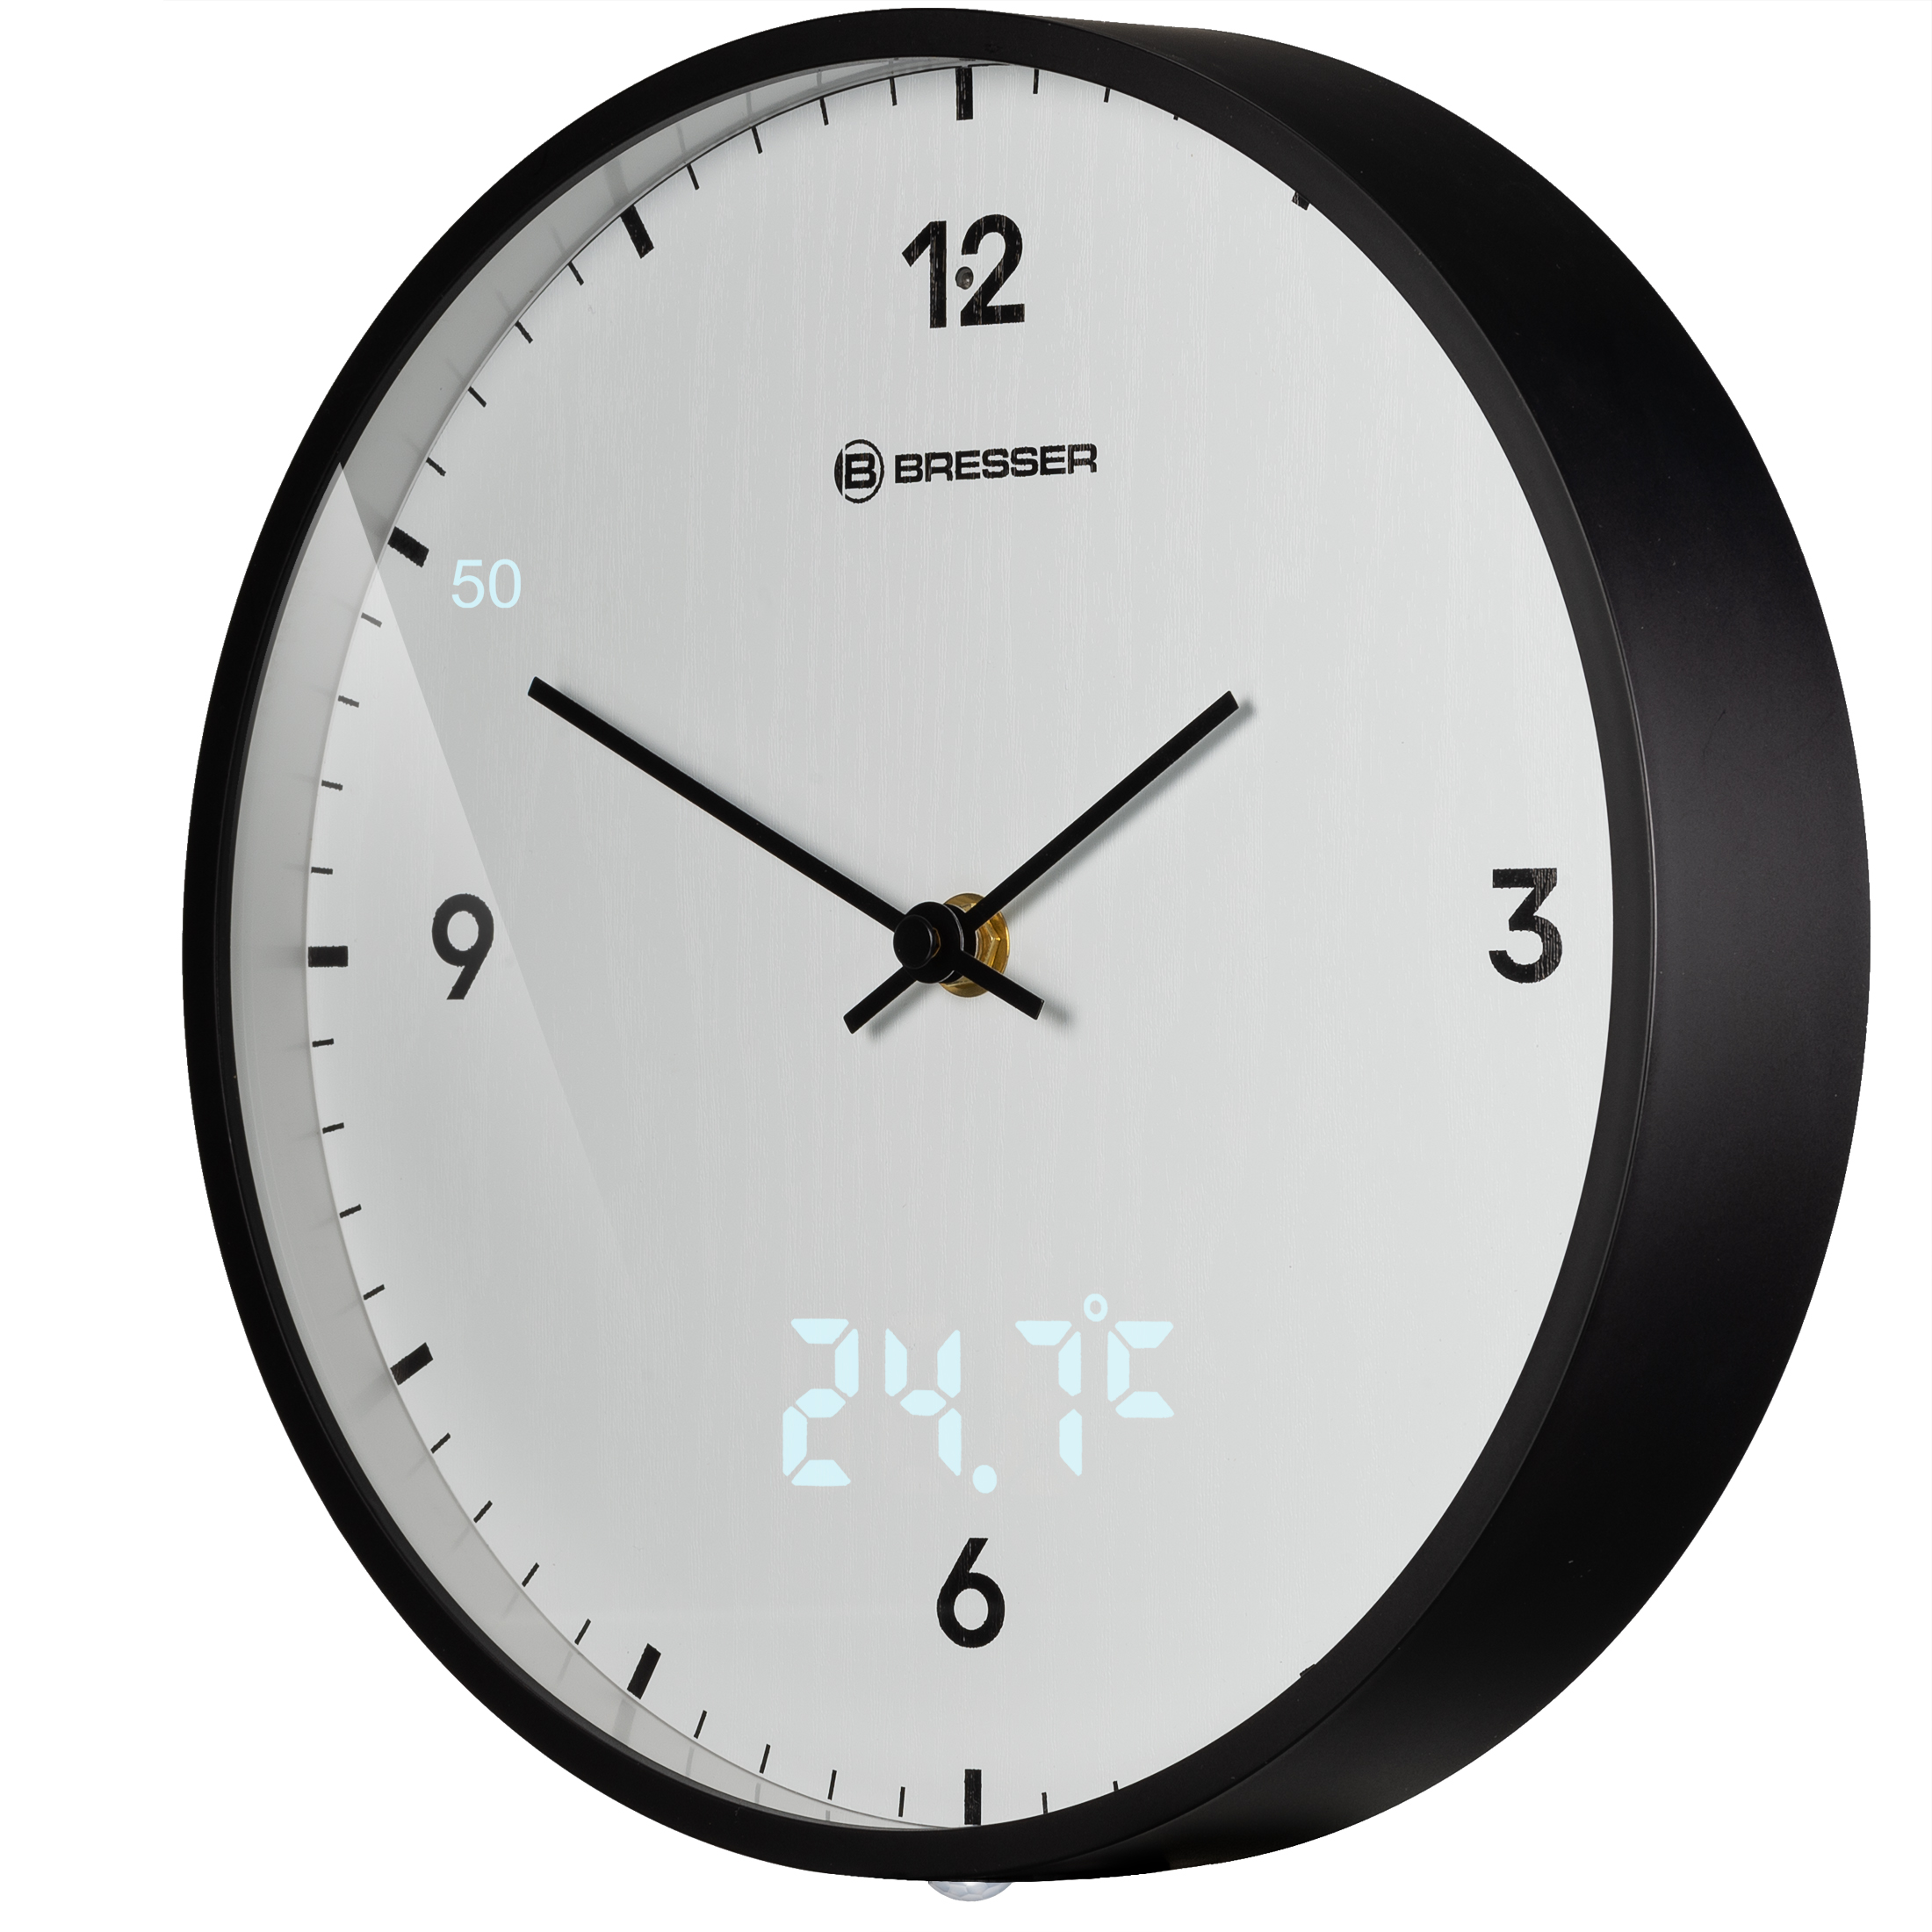 BRESSER MyTime LEDsec wall clock 24 cm with temperature display